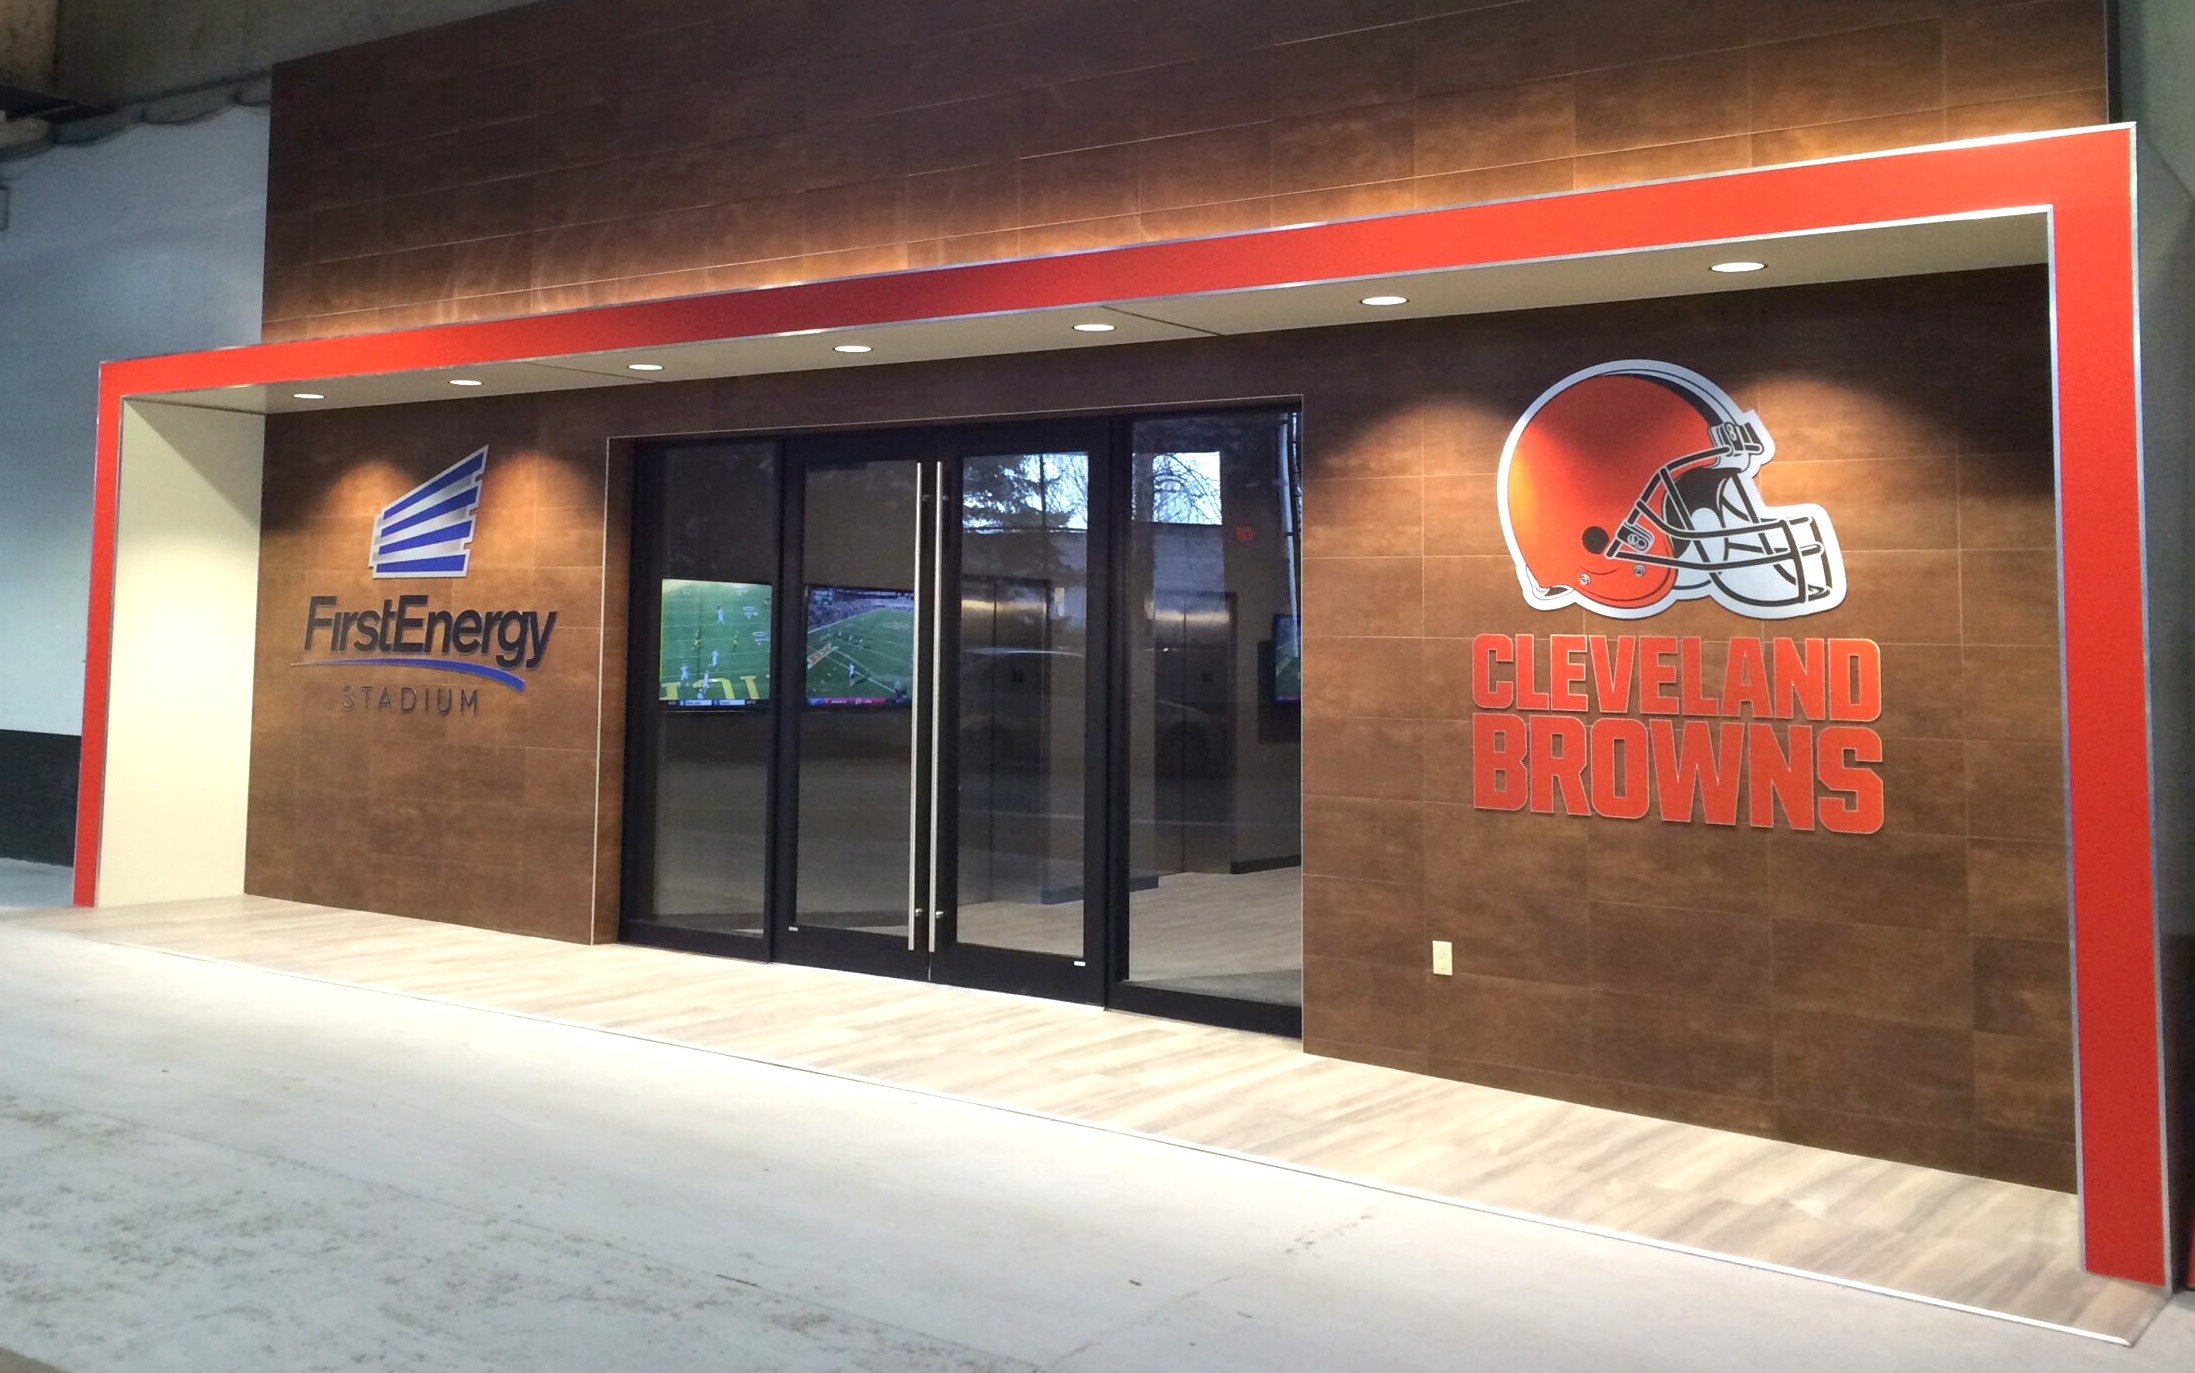 Cleveland Browns outdoor Signage on the facility. Portfolio Corporate Signage